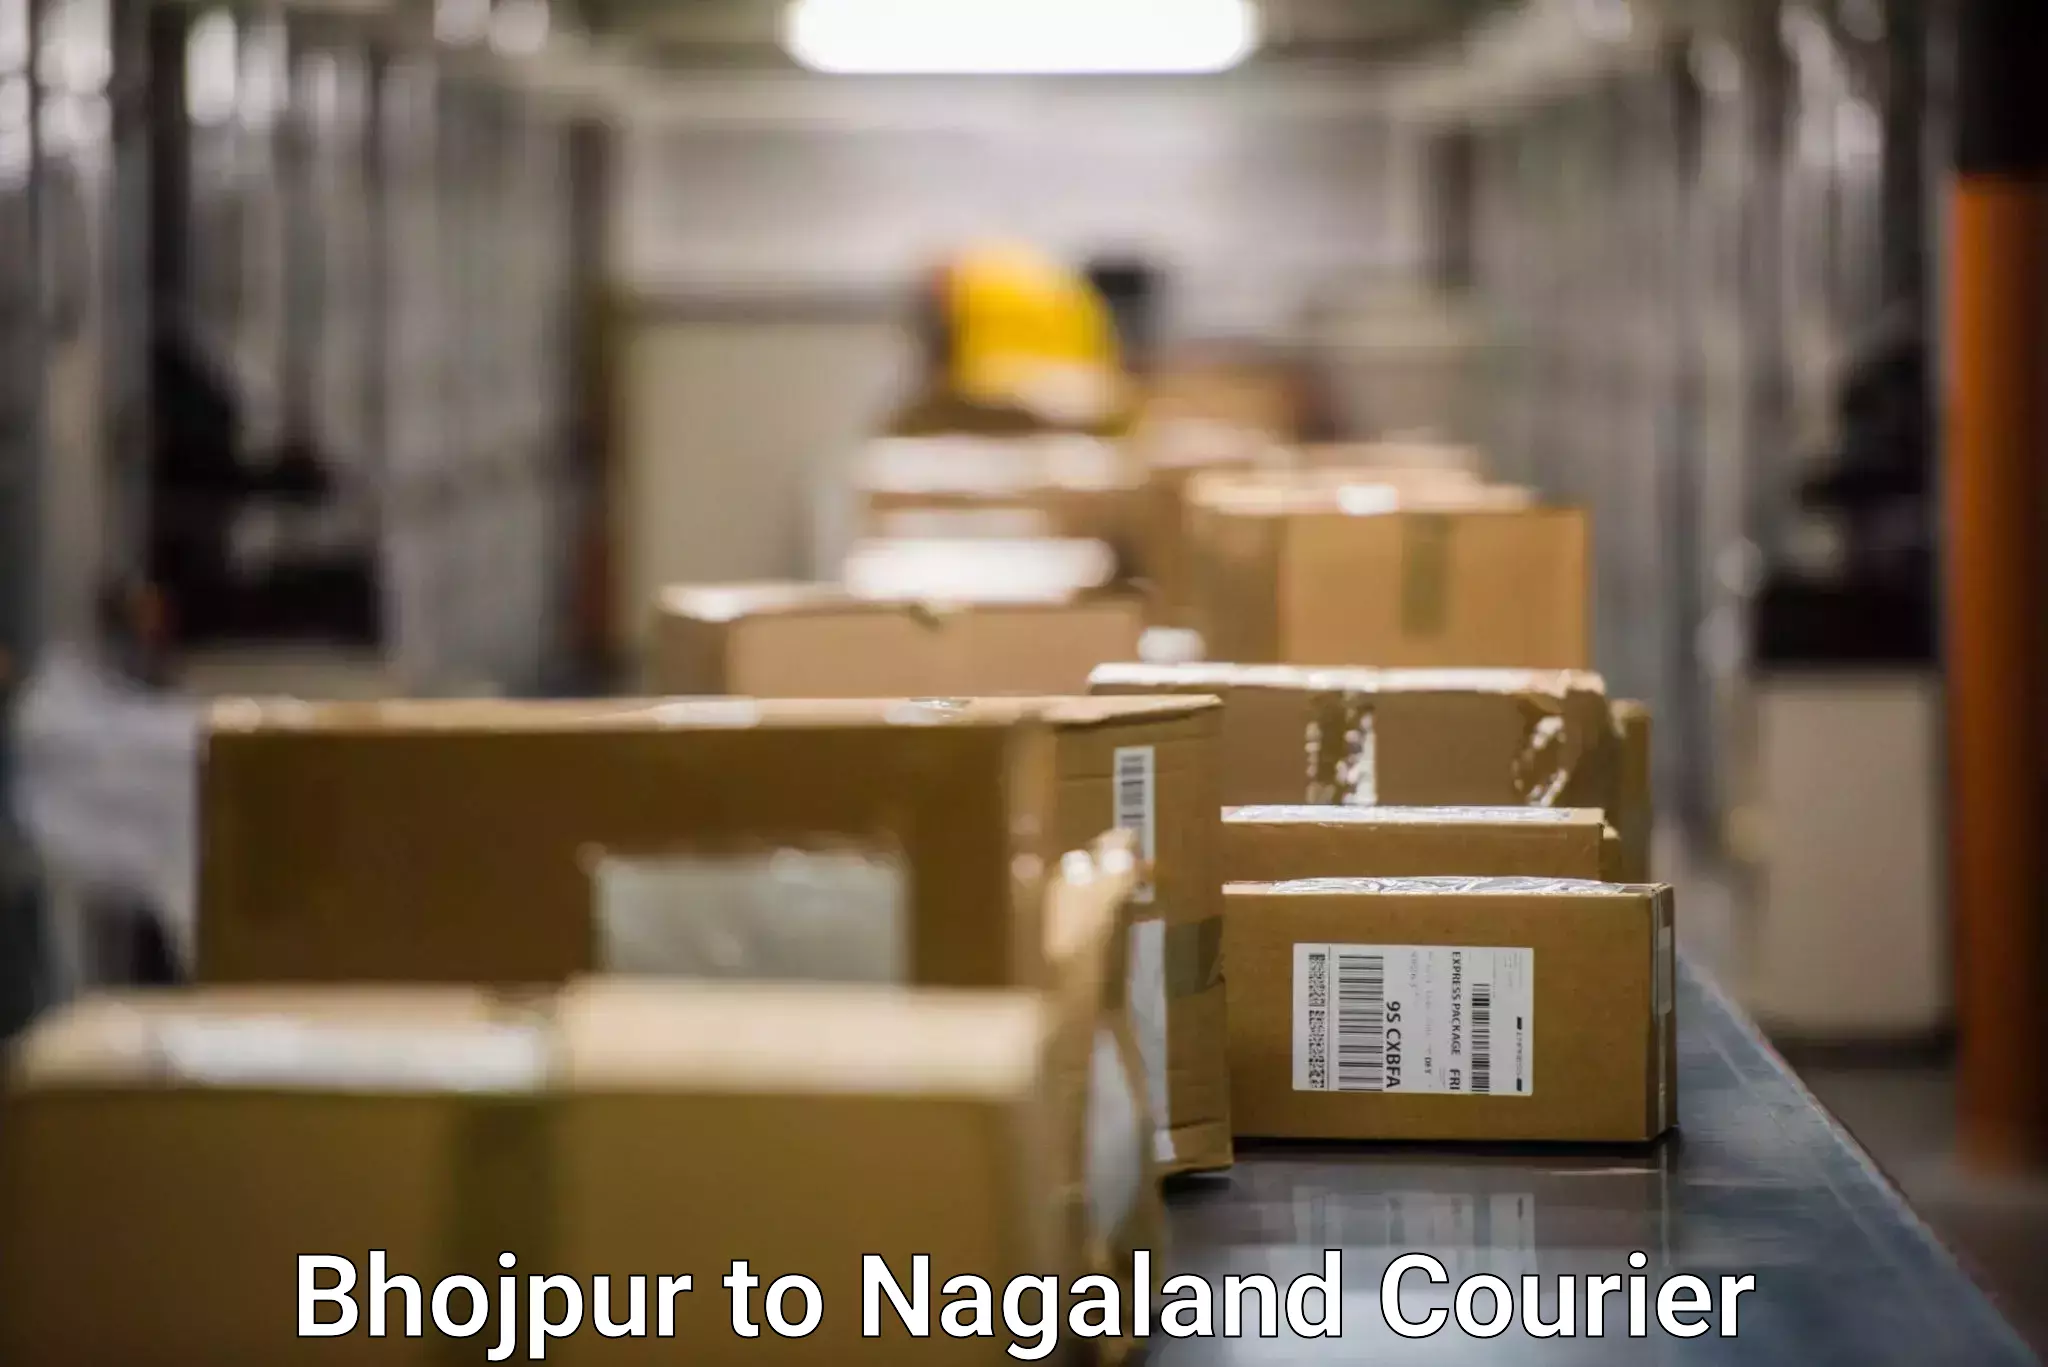 Reliable delivery network Bhojpur to Nagaland